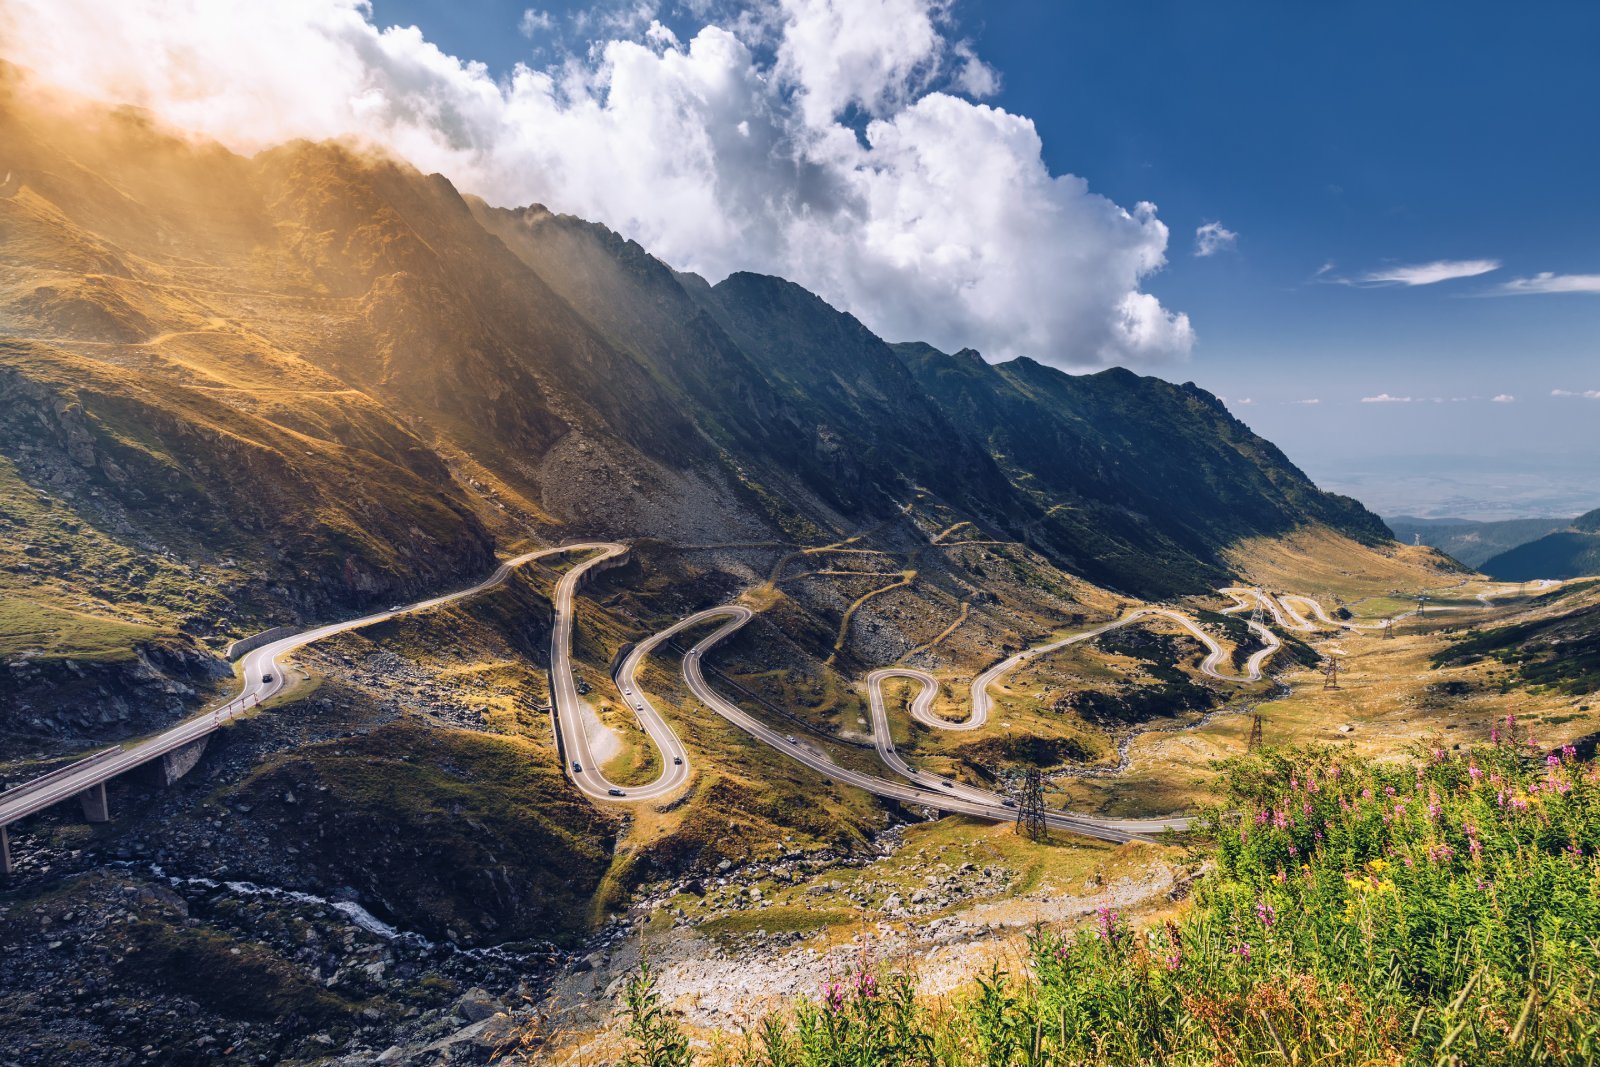 <p class="wp-caption-text">Image Credit: Shutterstock / DaLiu</p>  <p><span>The Transfagarasan Highway in Romania offers a driving experience that is both exhilarating and awe-inspiring. Cutting through the Carpathian Mountains, this road covers 90 kilometers, winding through some of Europe’s most stunning landscapes. The route climbs to an altitude of 2,042 meters, making it the second-highest paved road in Romania.</span></p>